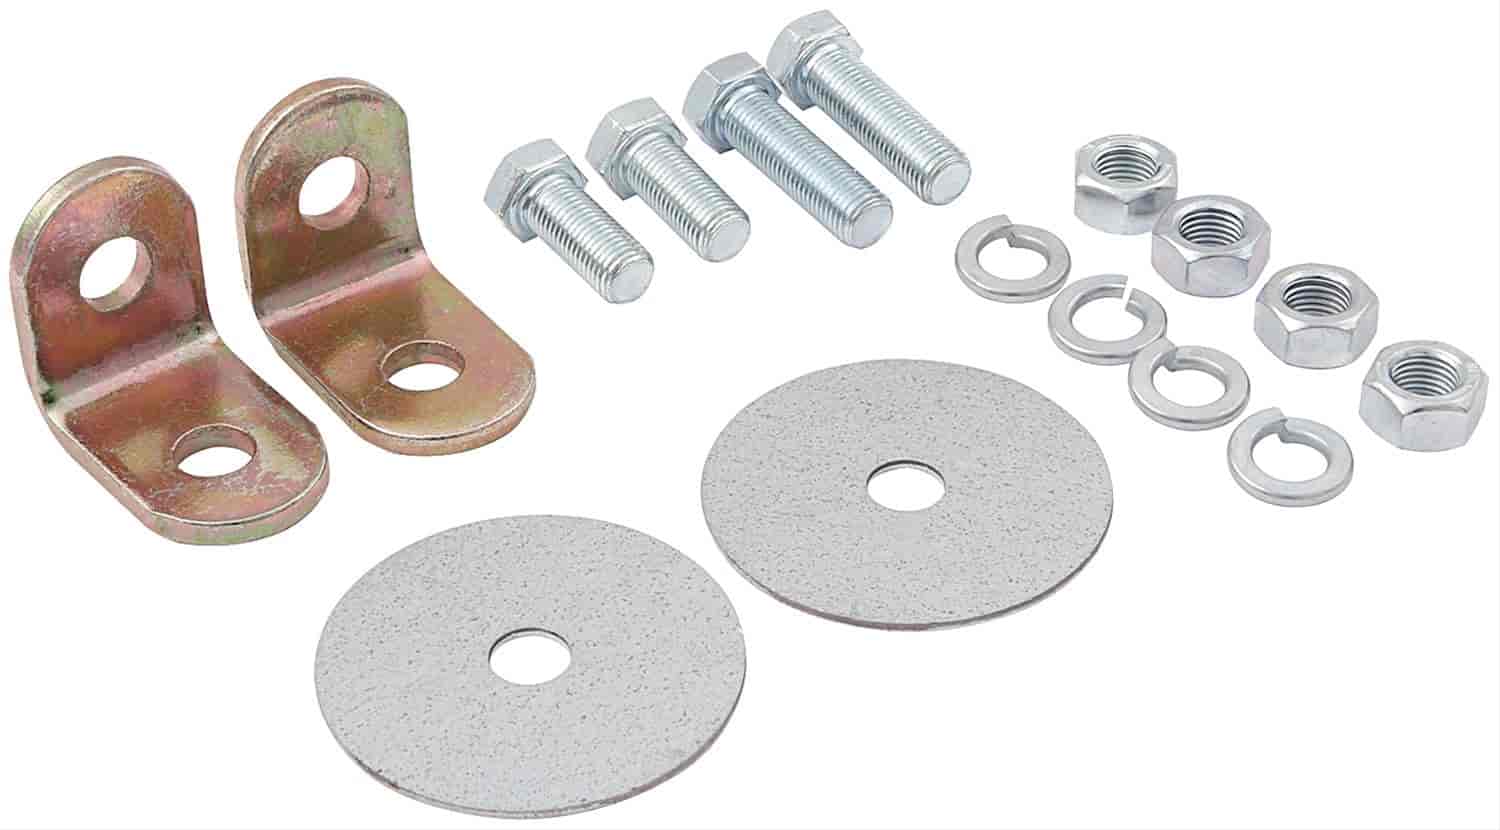 Seat Belt Installation Kit Fits 2 and 3